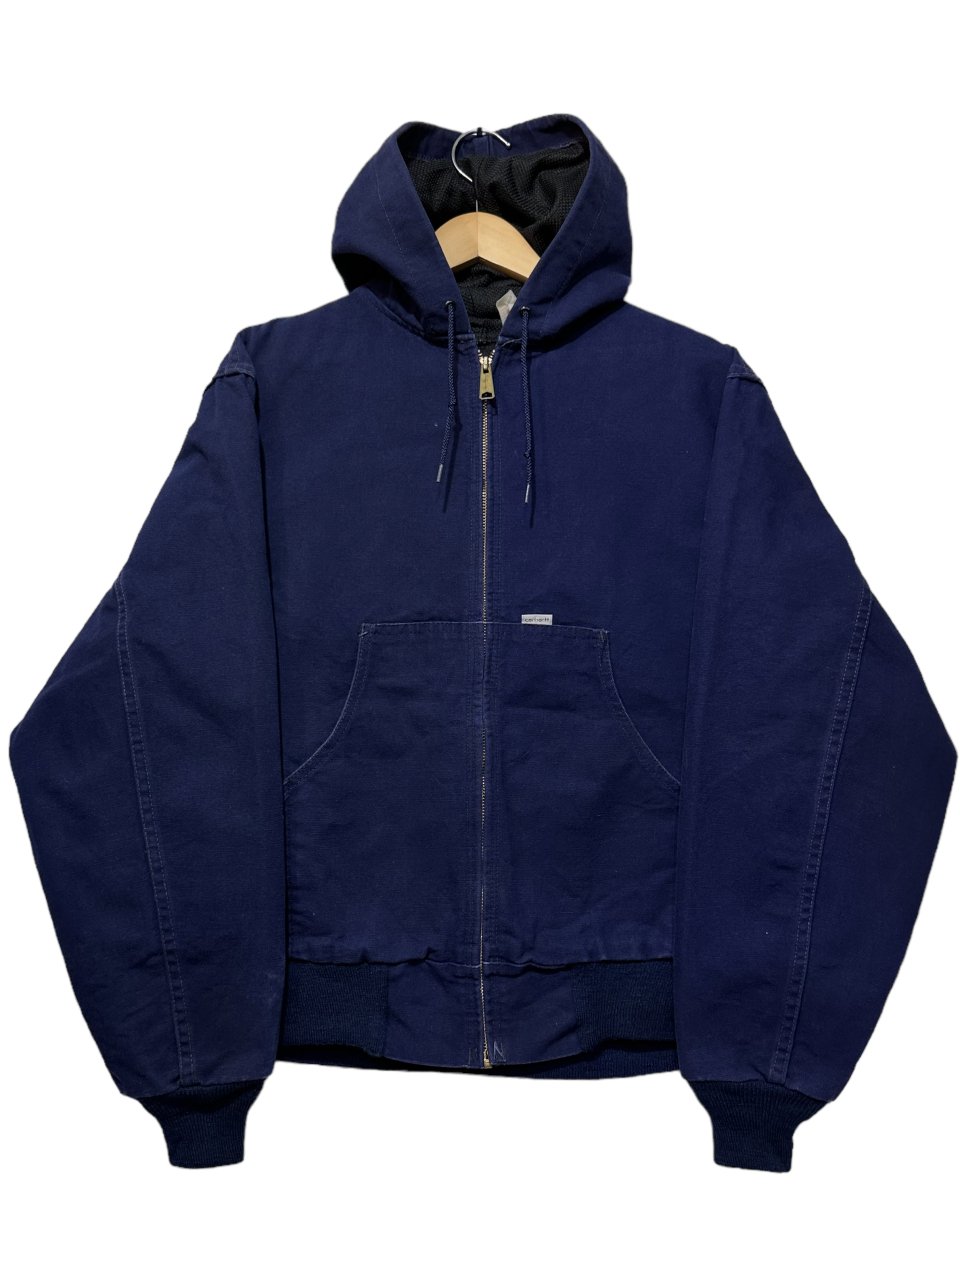 USA製 90s Carhartt Thermal Lined Active Jacket 紺 M カーハート 